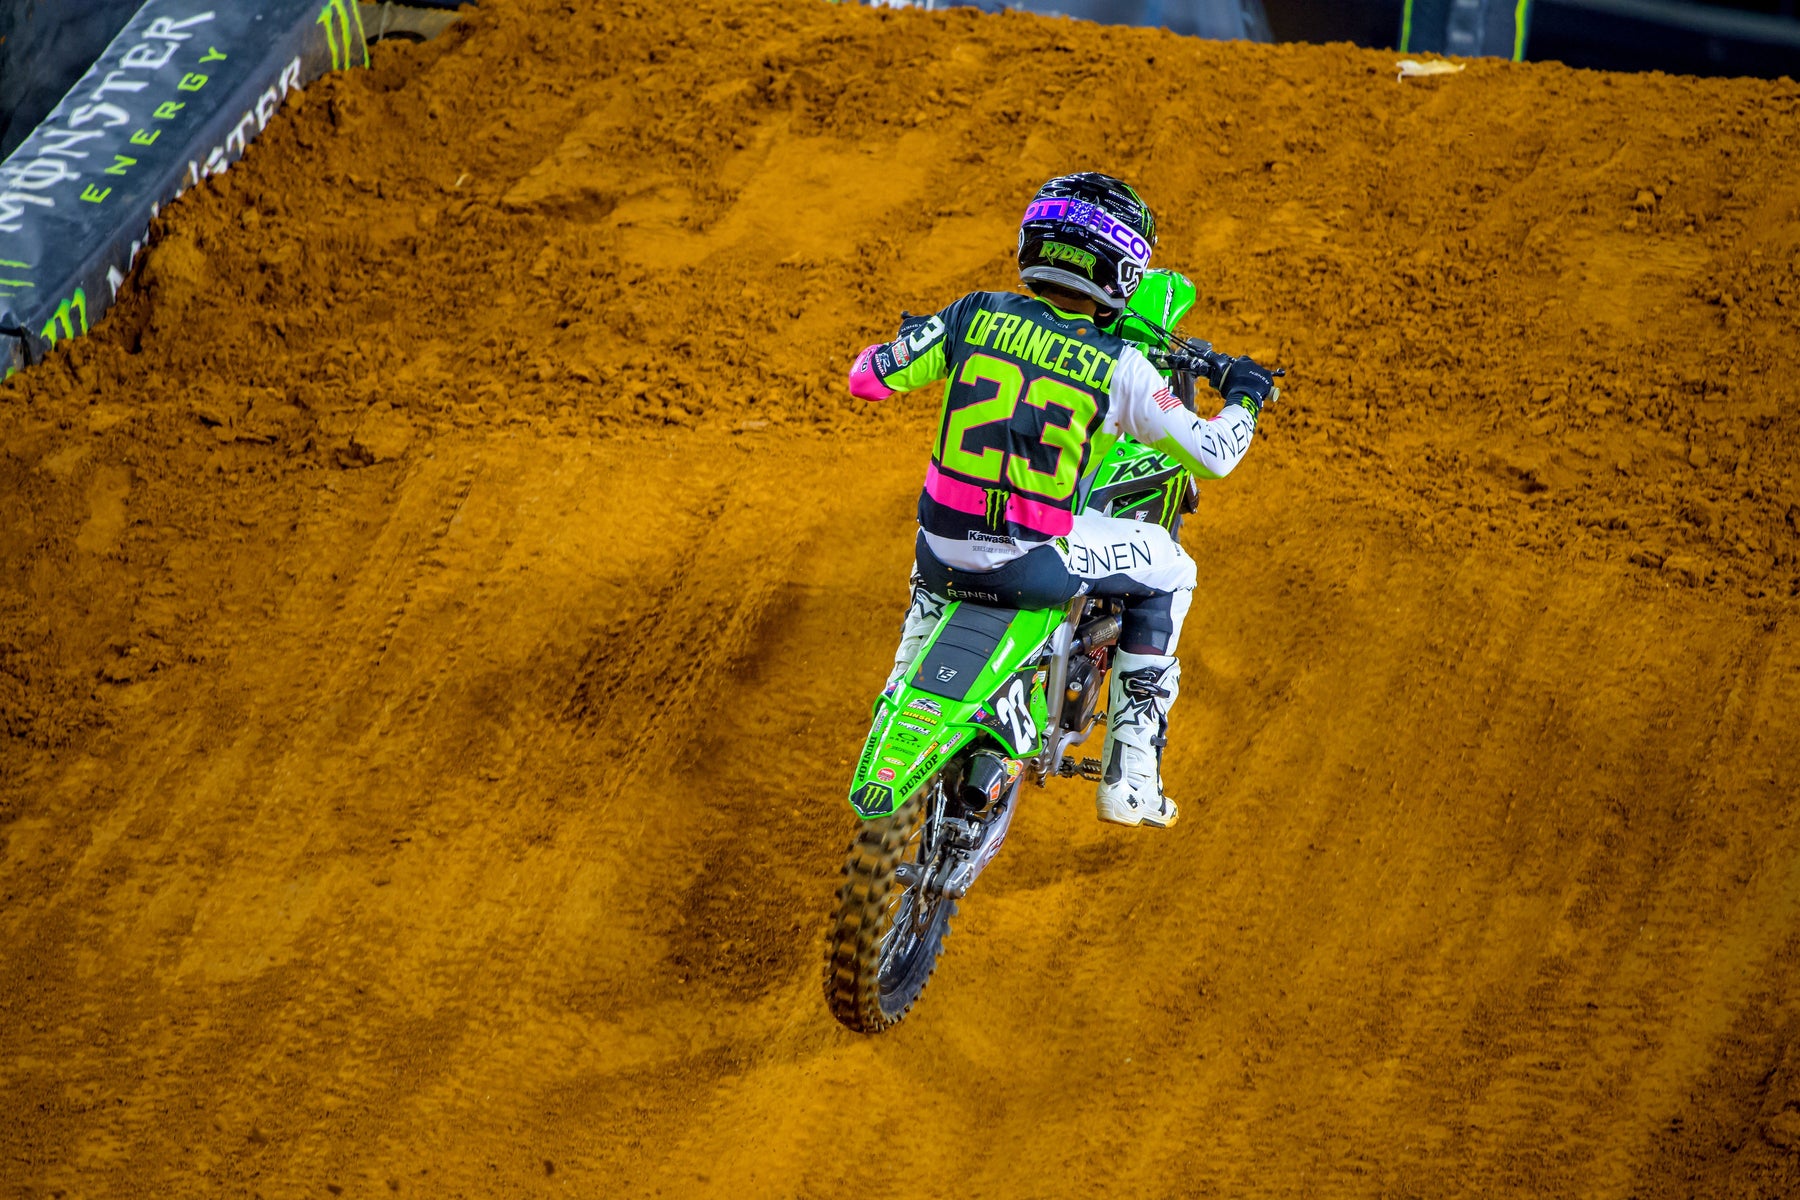 HIGH-FLYING RYDER DIFRANCESCO POWERS TO 250SX FUTURES VICTORY AT ARLINGTON